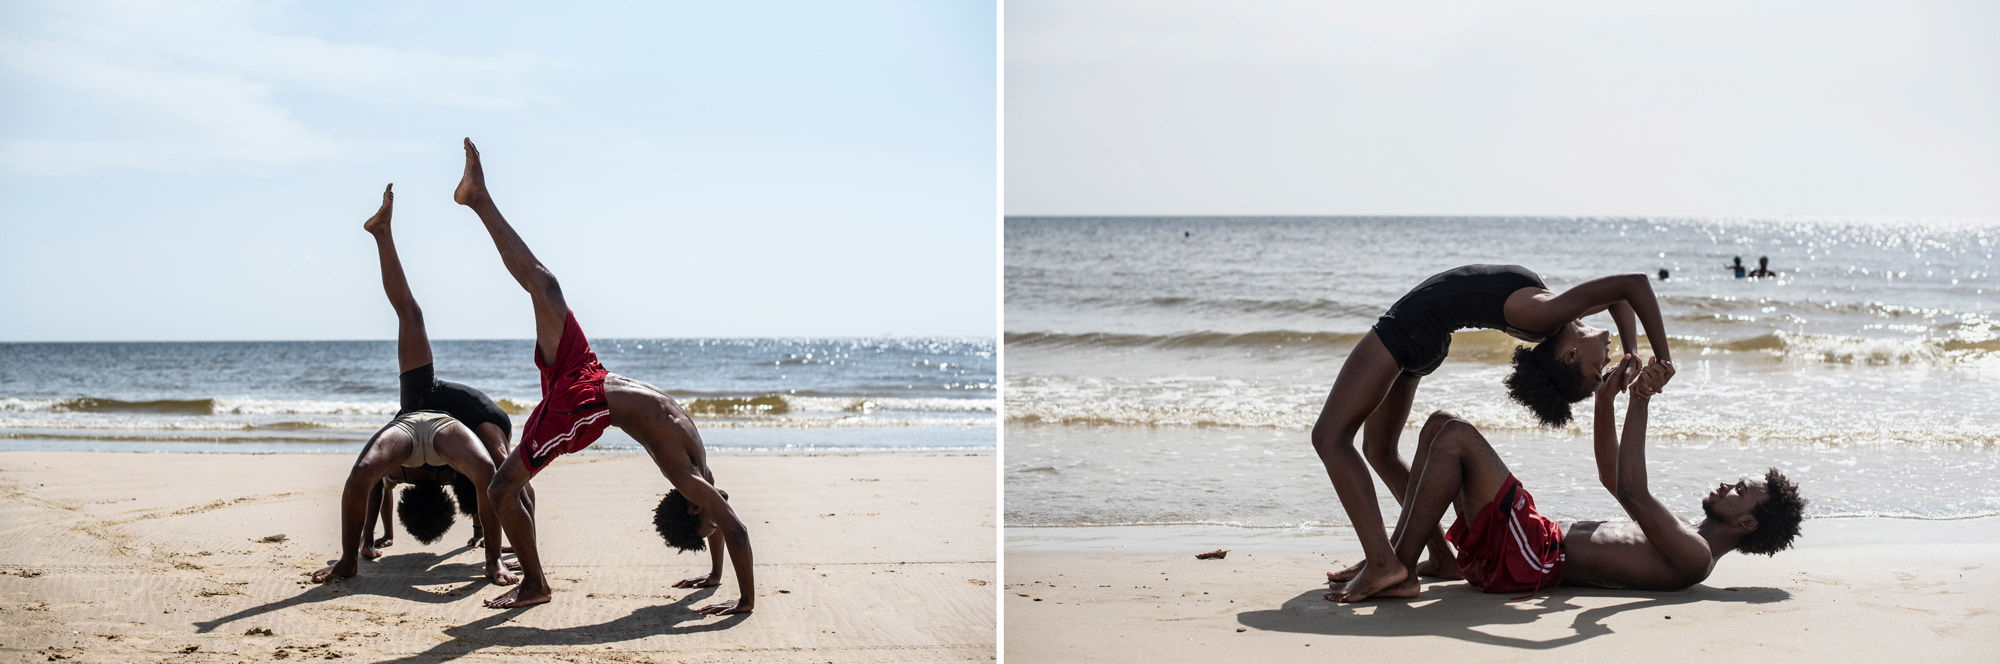 Side-by-side images of dancers on a sunlit beach.